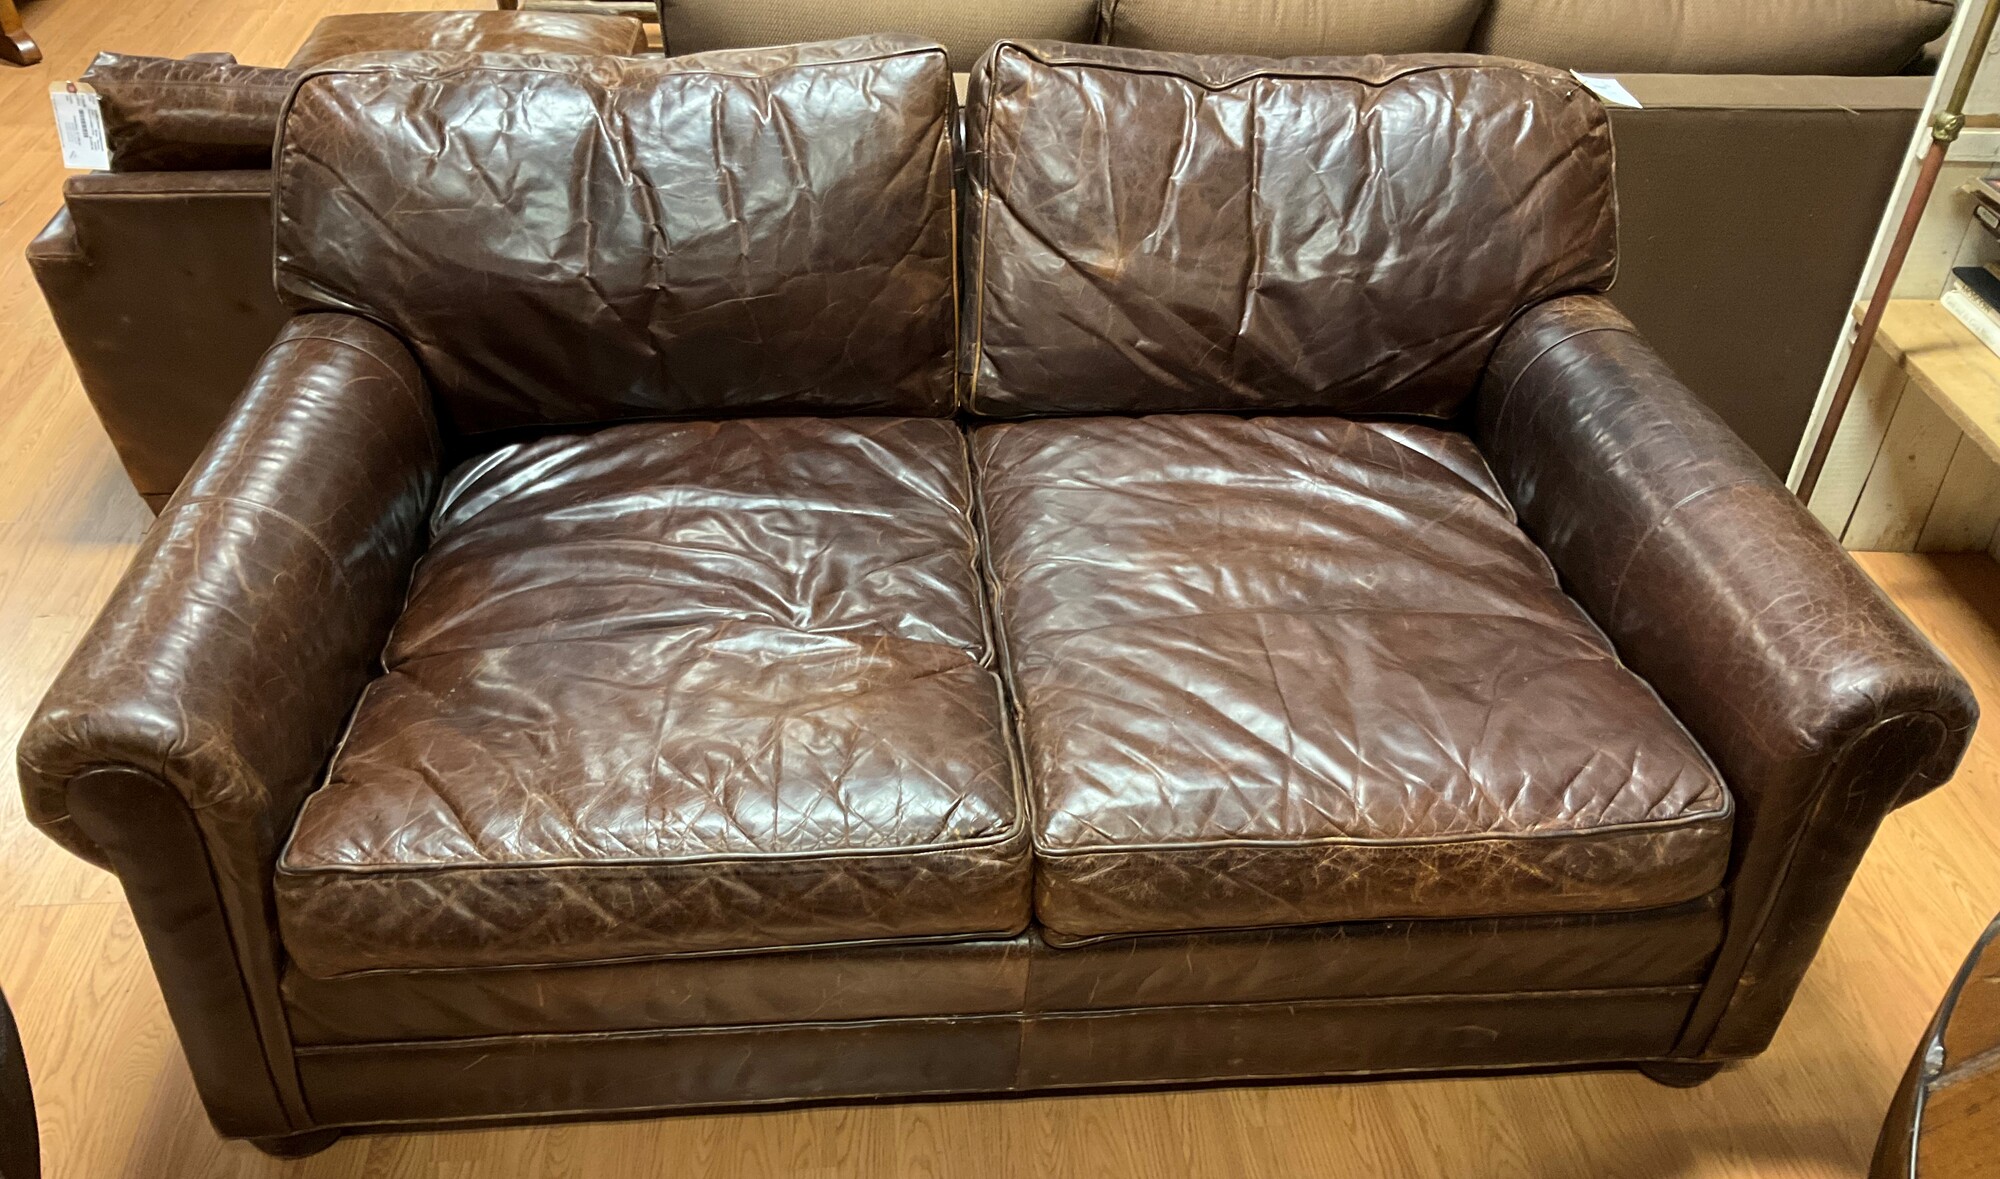 Old Hickory Tannery Sofa
Dark Brown, Deep
30.5in(H) 45in(D) 73in(W)